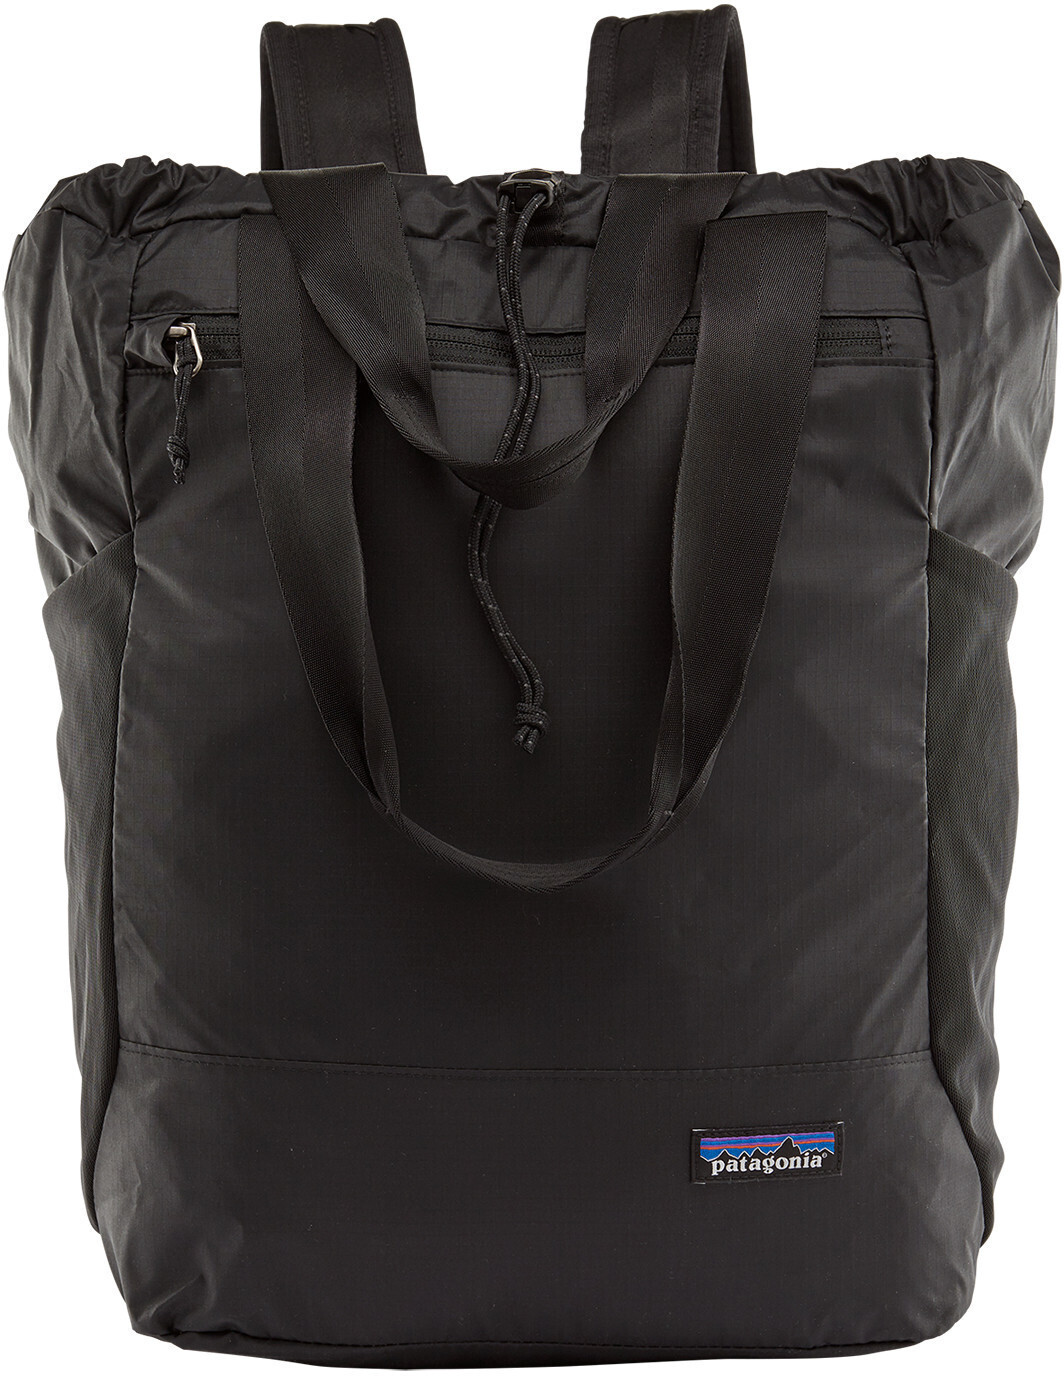 Photos - Backpack Patagonia Ultralight Black Hole Tote Pack 27L black 